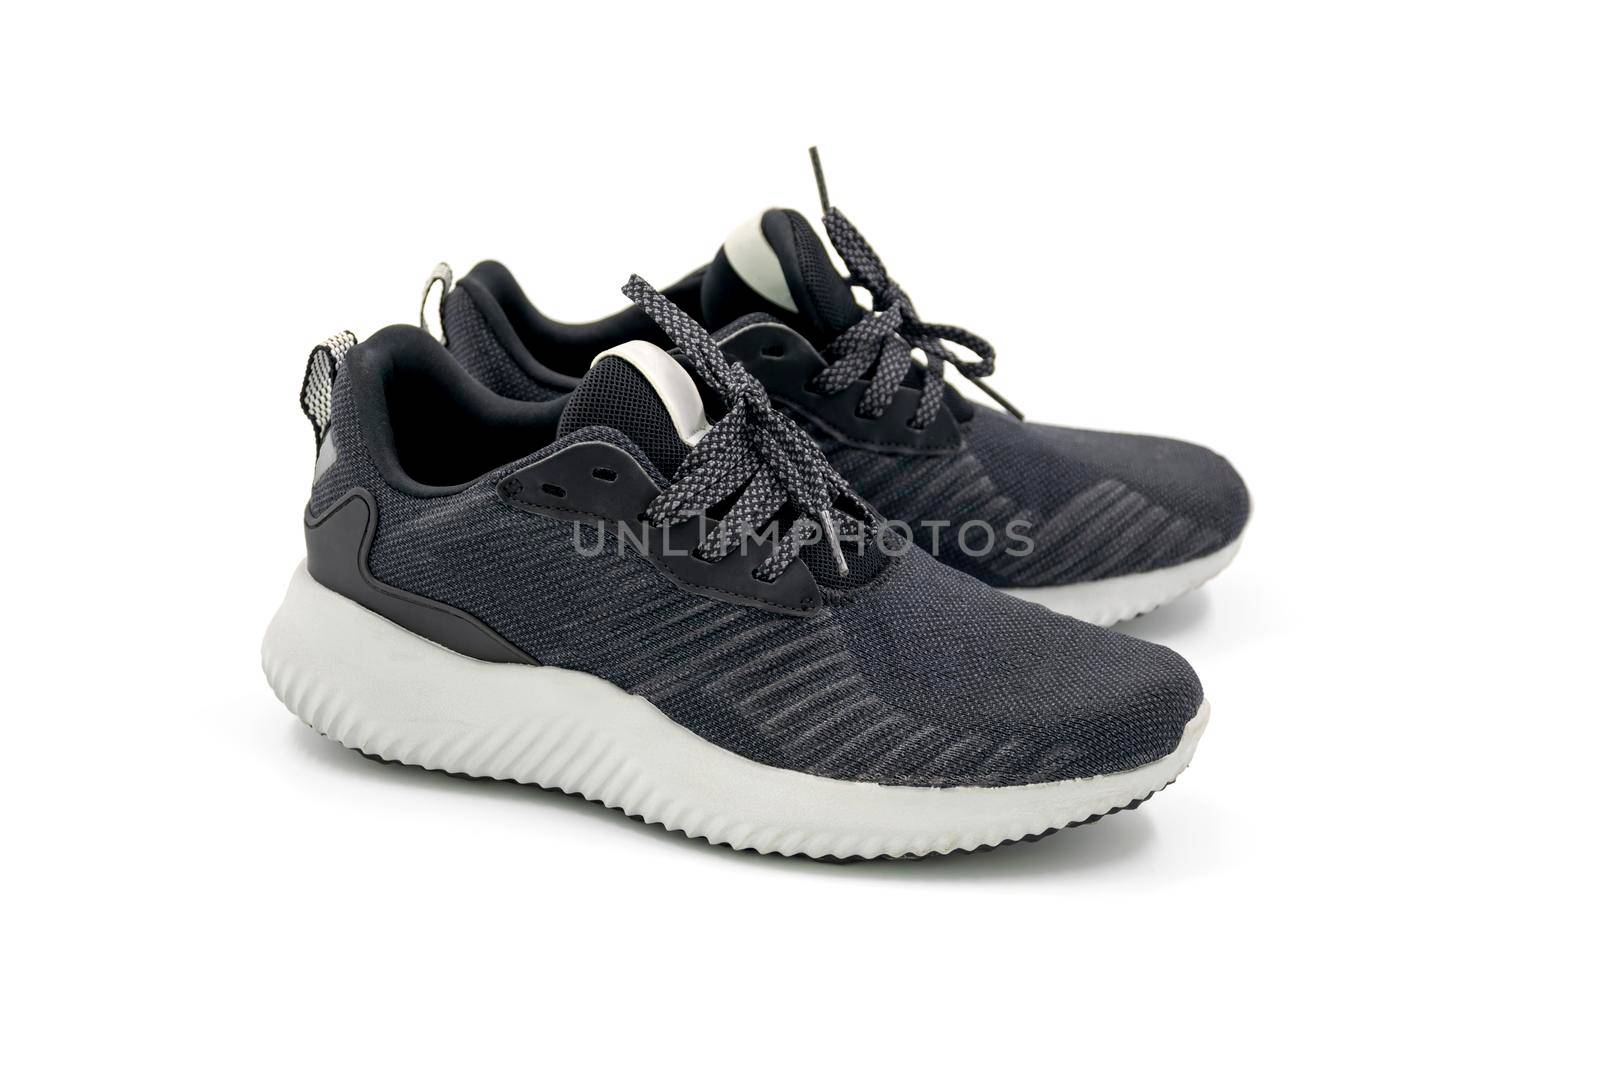 Black color fashion sport shoes isolated on white background.